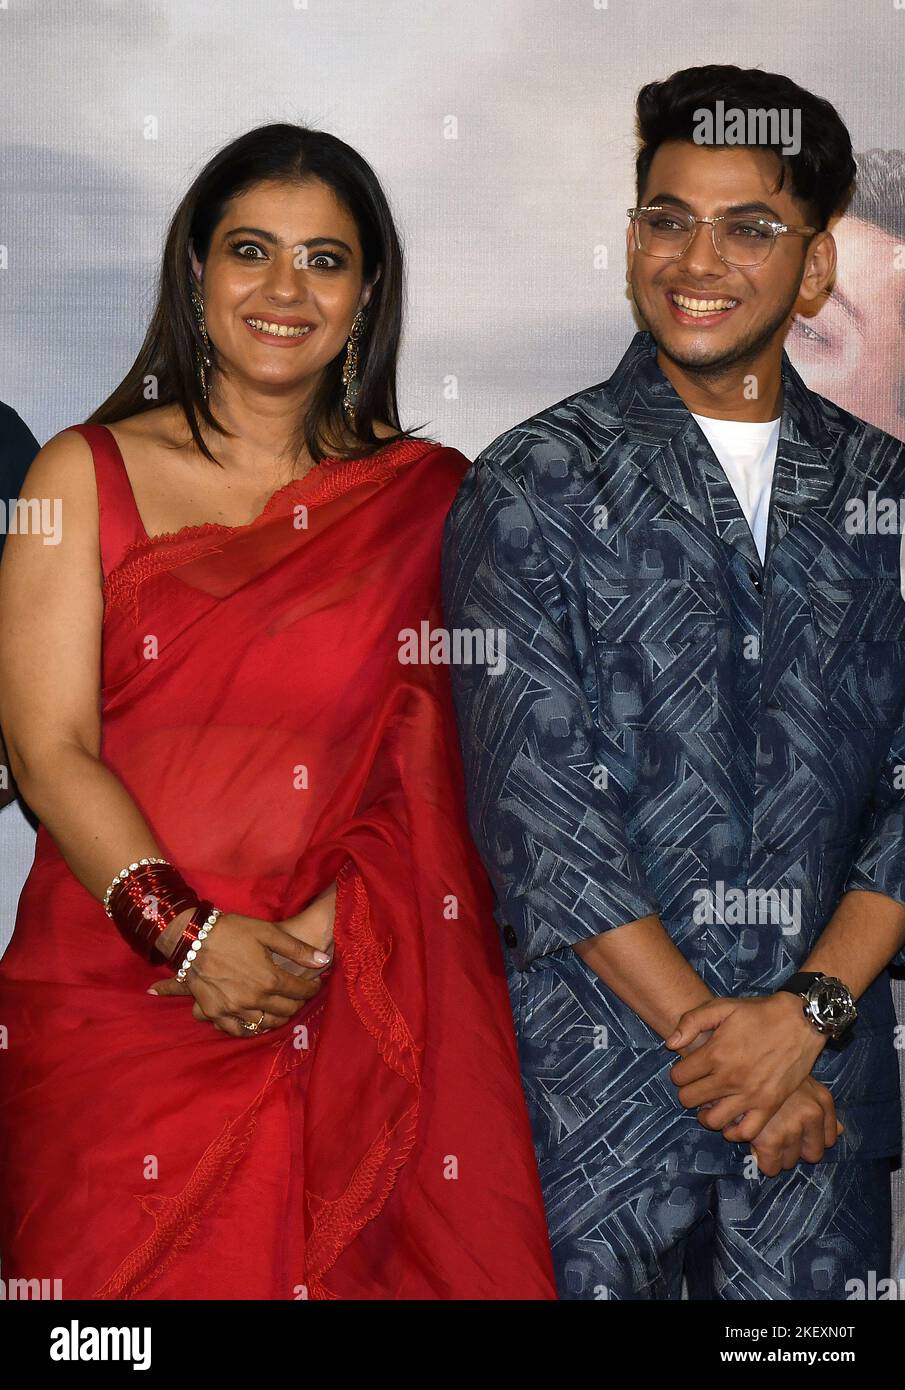 Mumbai, India. 14th Nov, 2022. L-R Bollywood actress Kajol Devgan and television and film actor Vishal Jethwa seen during the trailer launch of their upcoming film 'Salaam Venky' in Mumbai. The film will be released in theaters on 9th December 2022. Credit: SOPA Images Limited/Alamy Live News Stock Photo